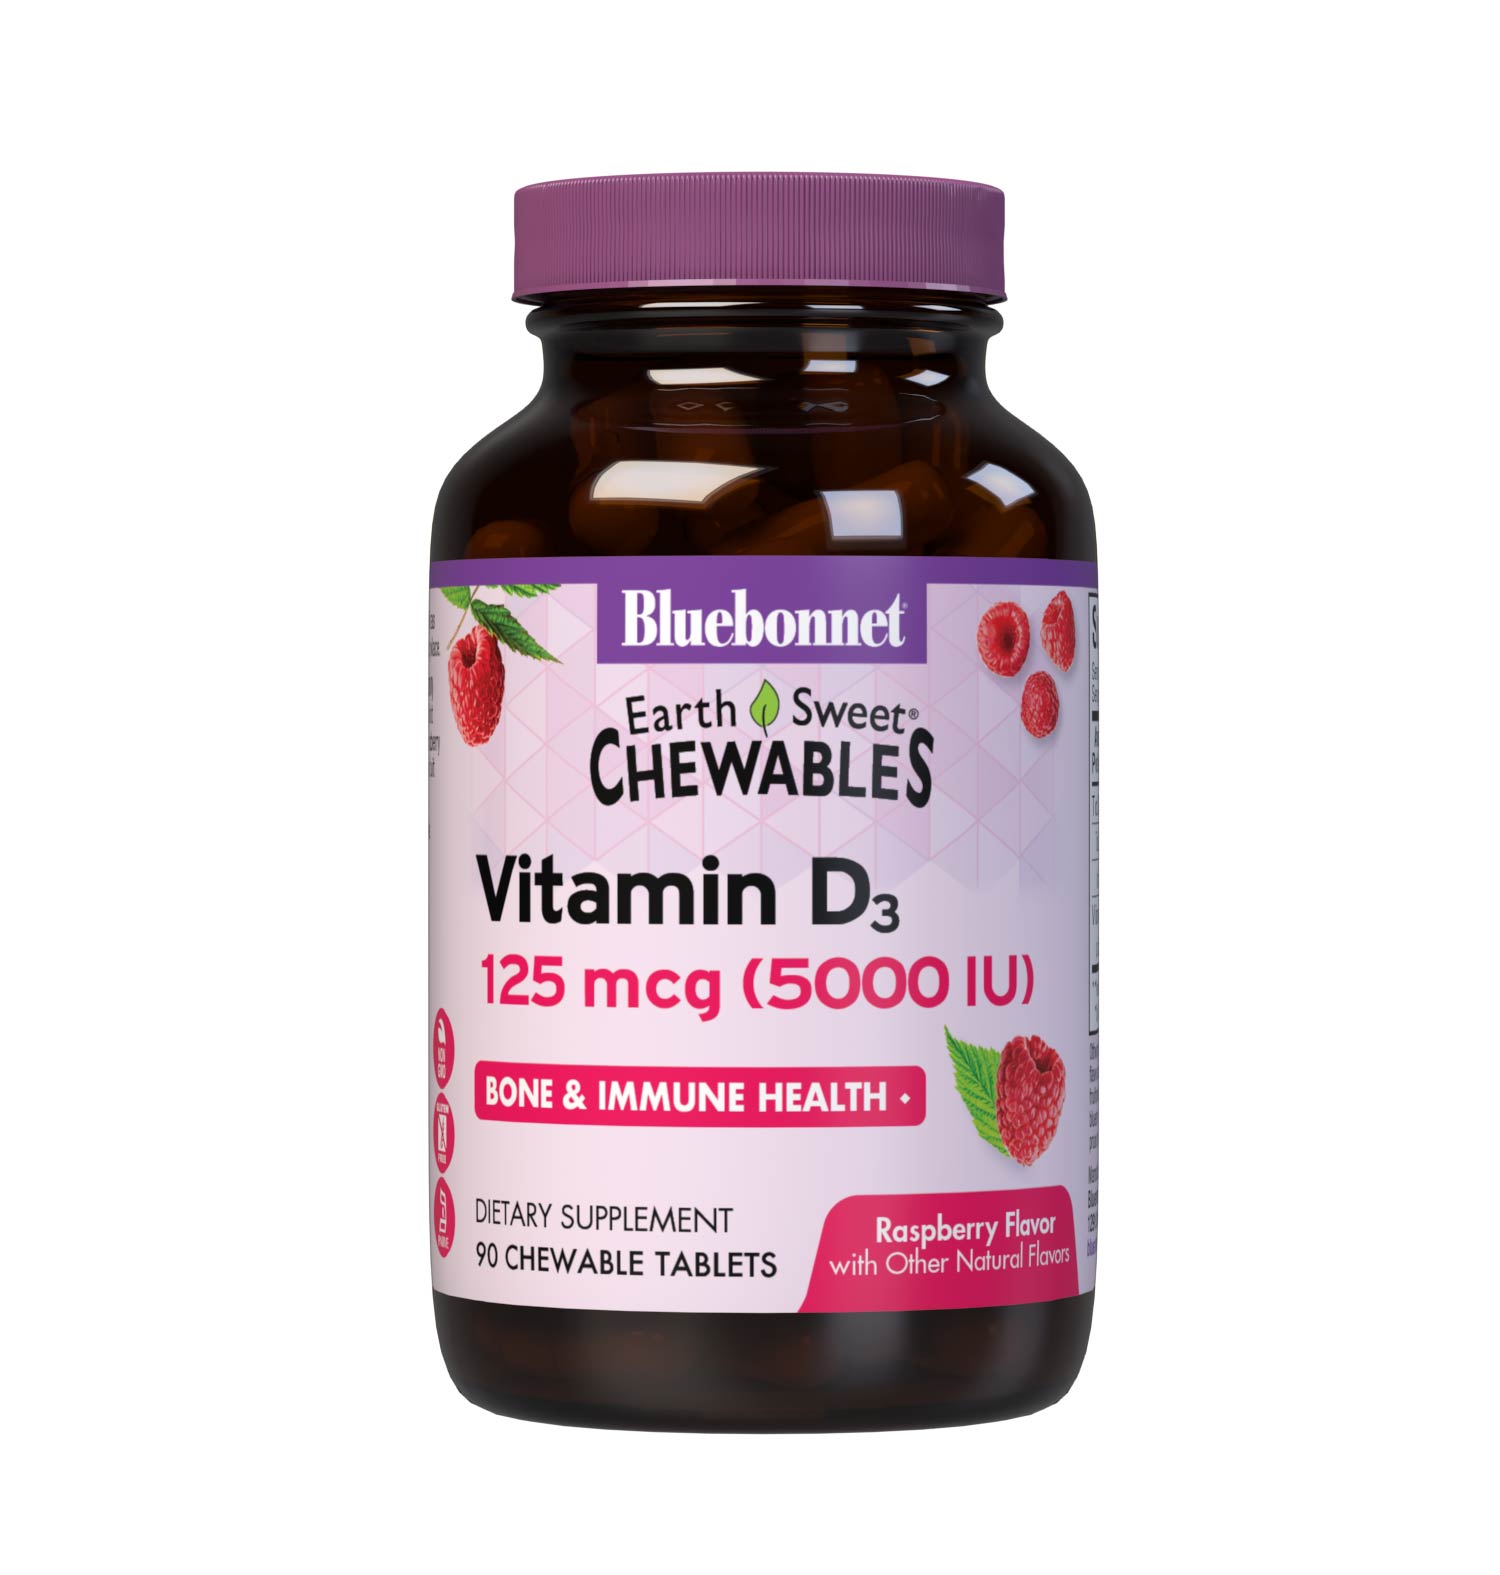 Bluebonnet’s EarthSweet Chewables Vitamin D3 125 mcg (5000 IU) 90 Chewable Tablets are formulated with vitamin D3 (cholecalciferol) from lanolin that supports strong bones and immune function in a delicious raspberry flavor. #size_90 count